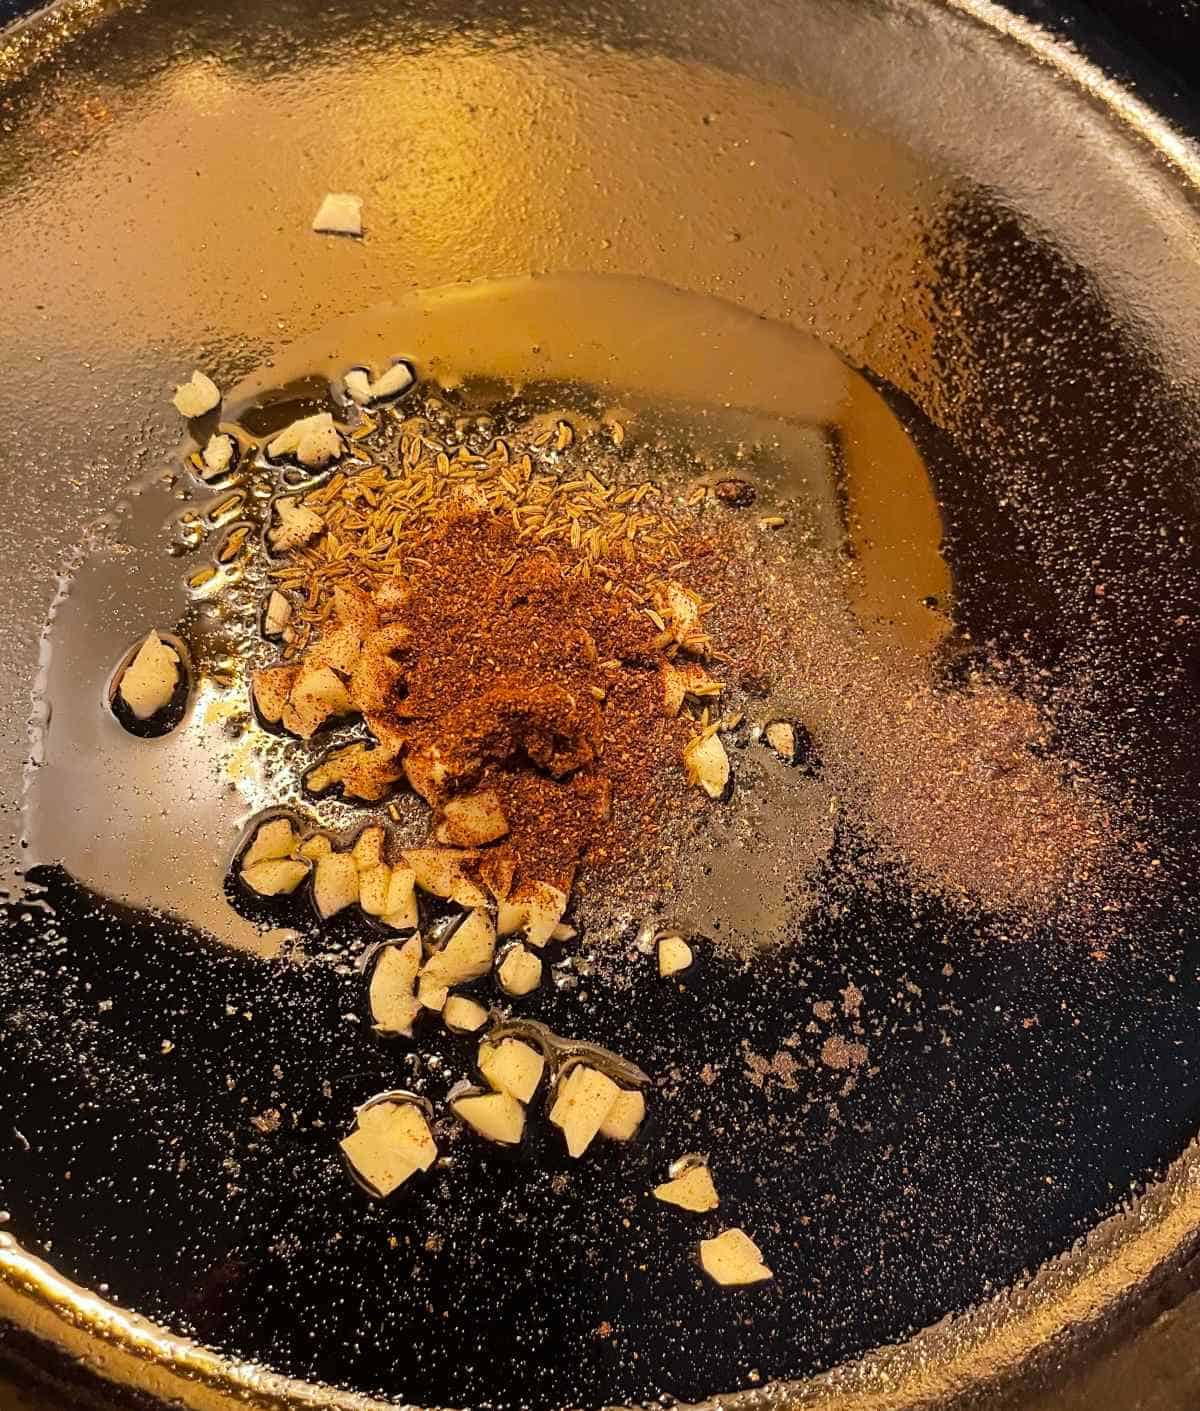 garlic and spices heating in a black skillet.